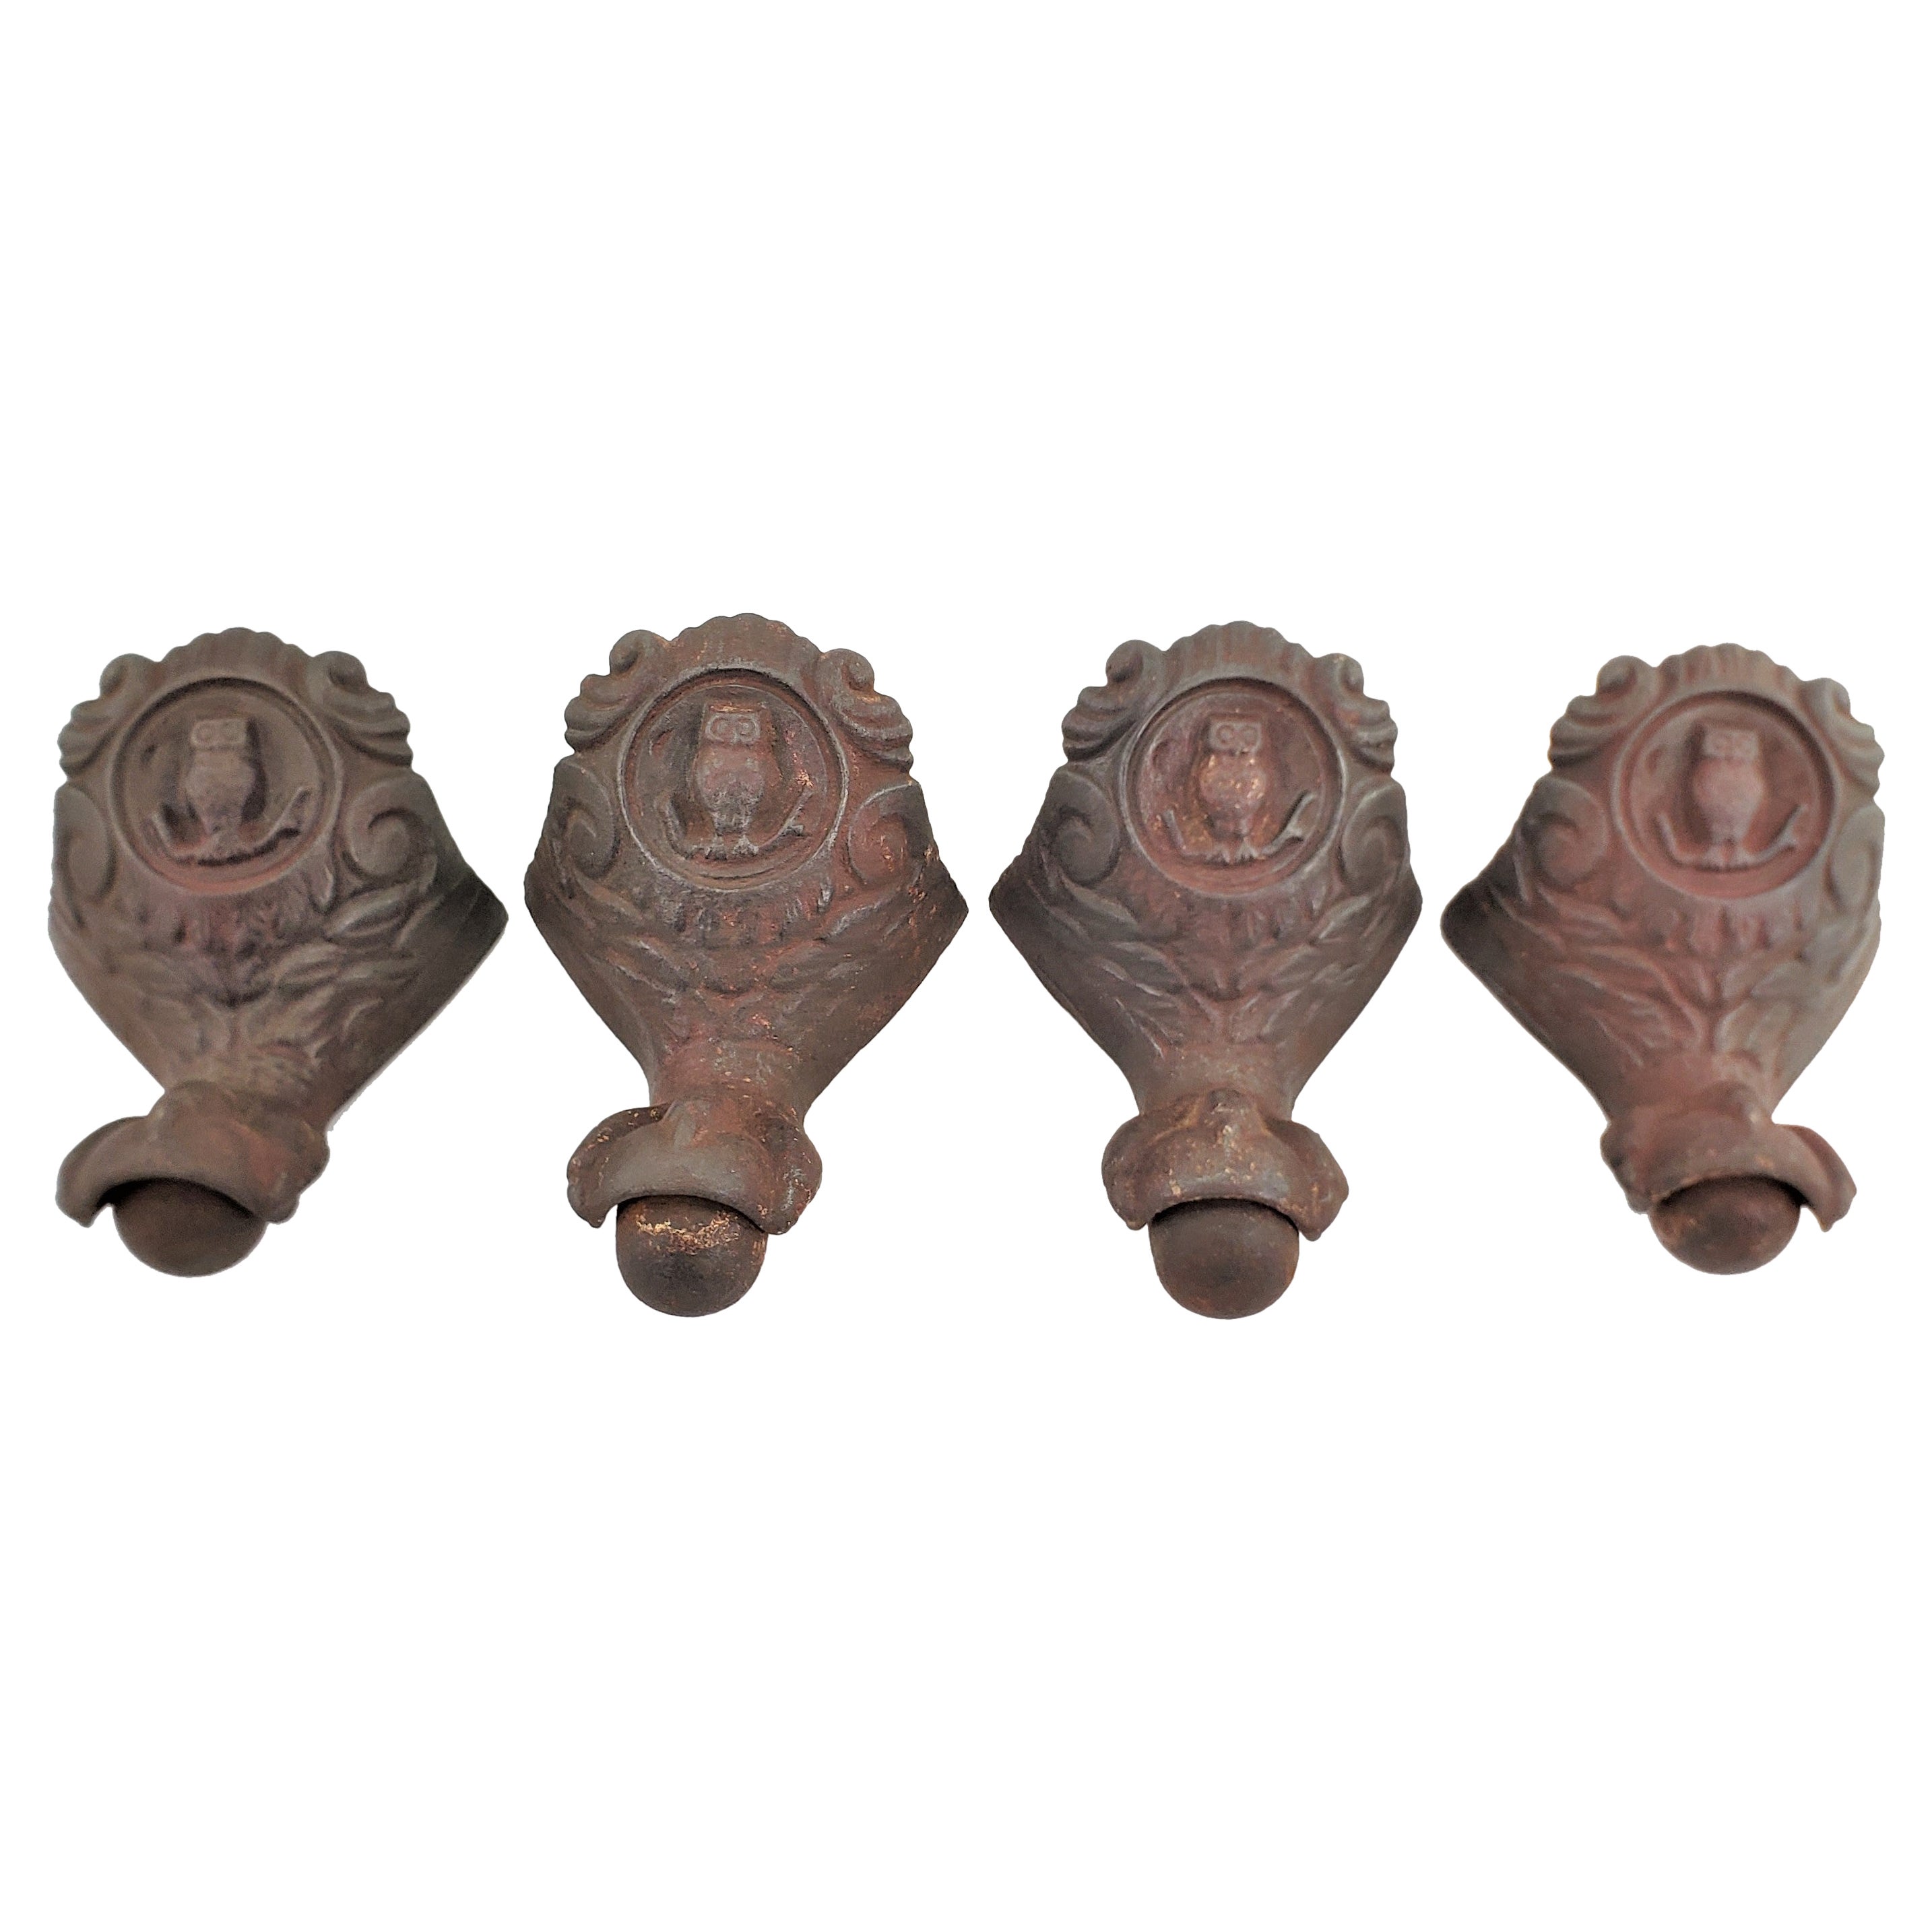 Set of 4 Salvaged Antique Ornately Cast Iron Claw Tub Feet with Owl Decoration